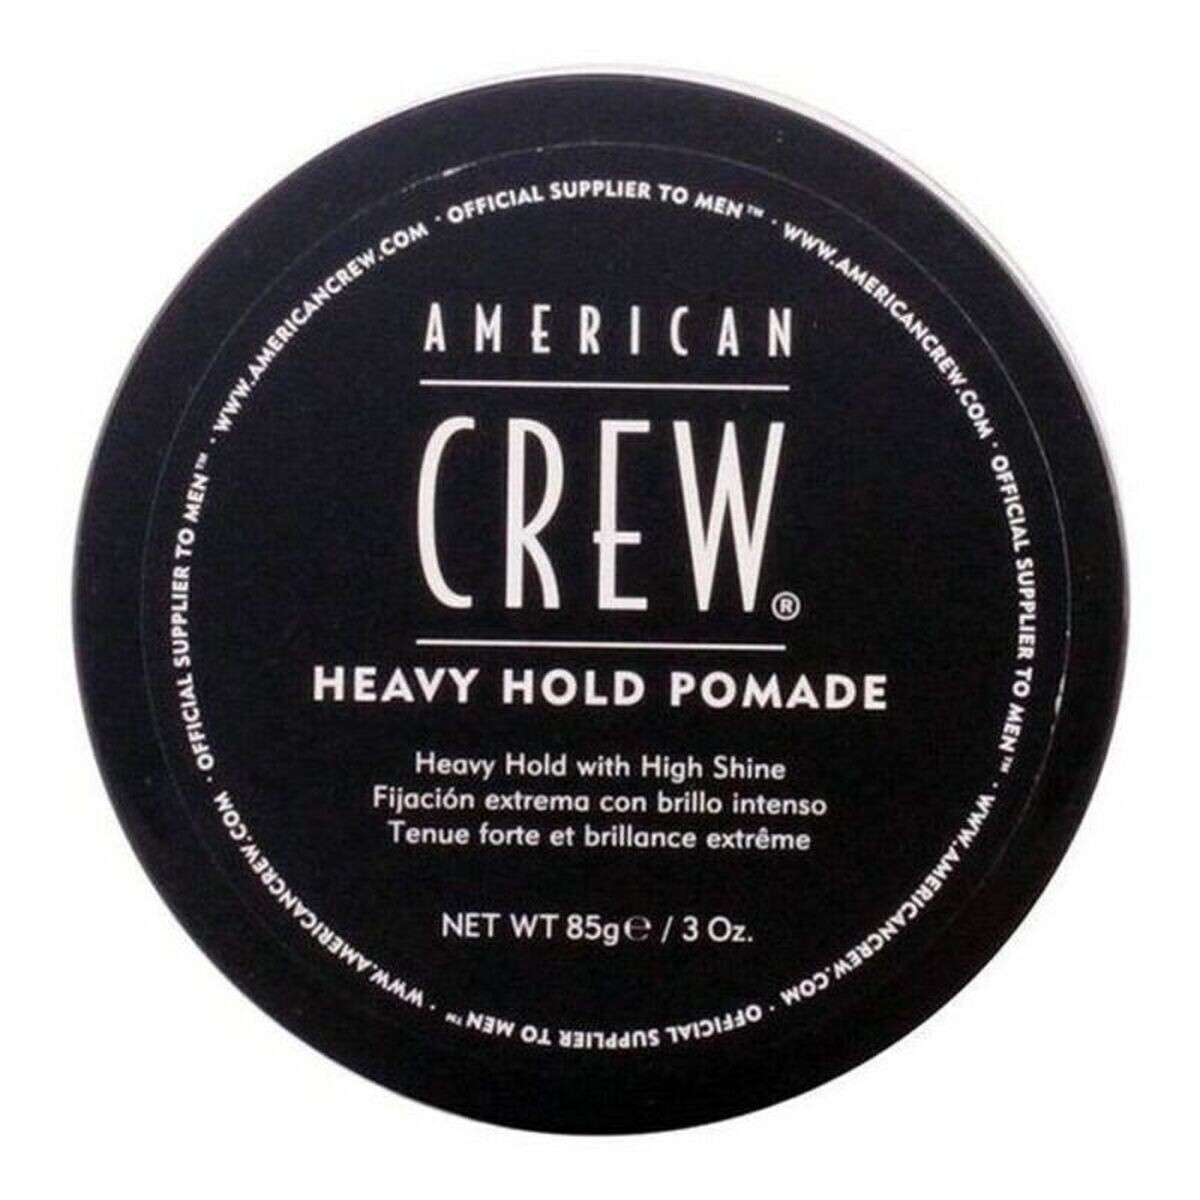 Firm Hold Wax Heavy Hold Pomade American Crew